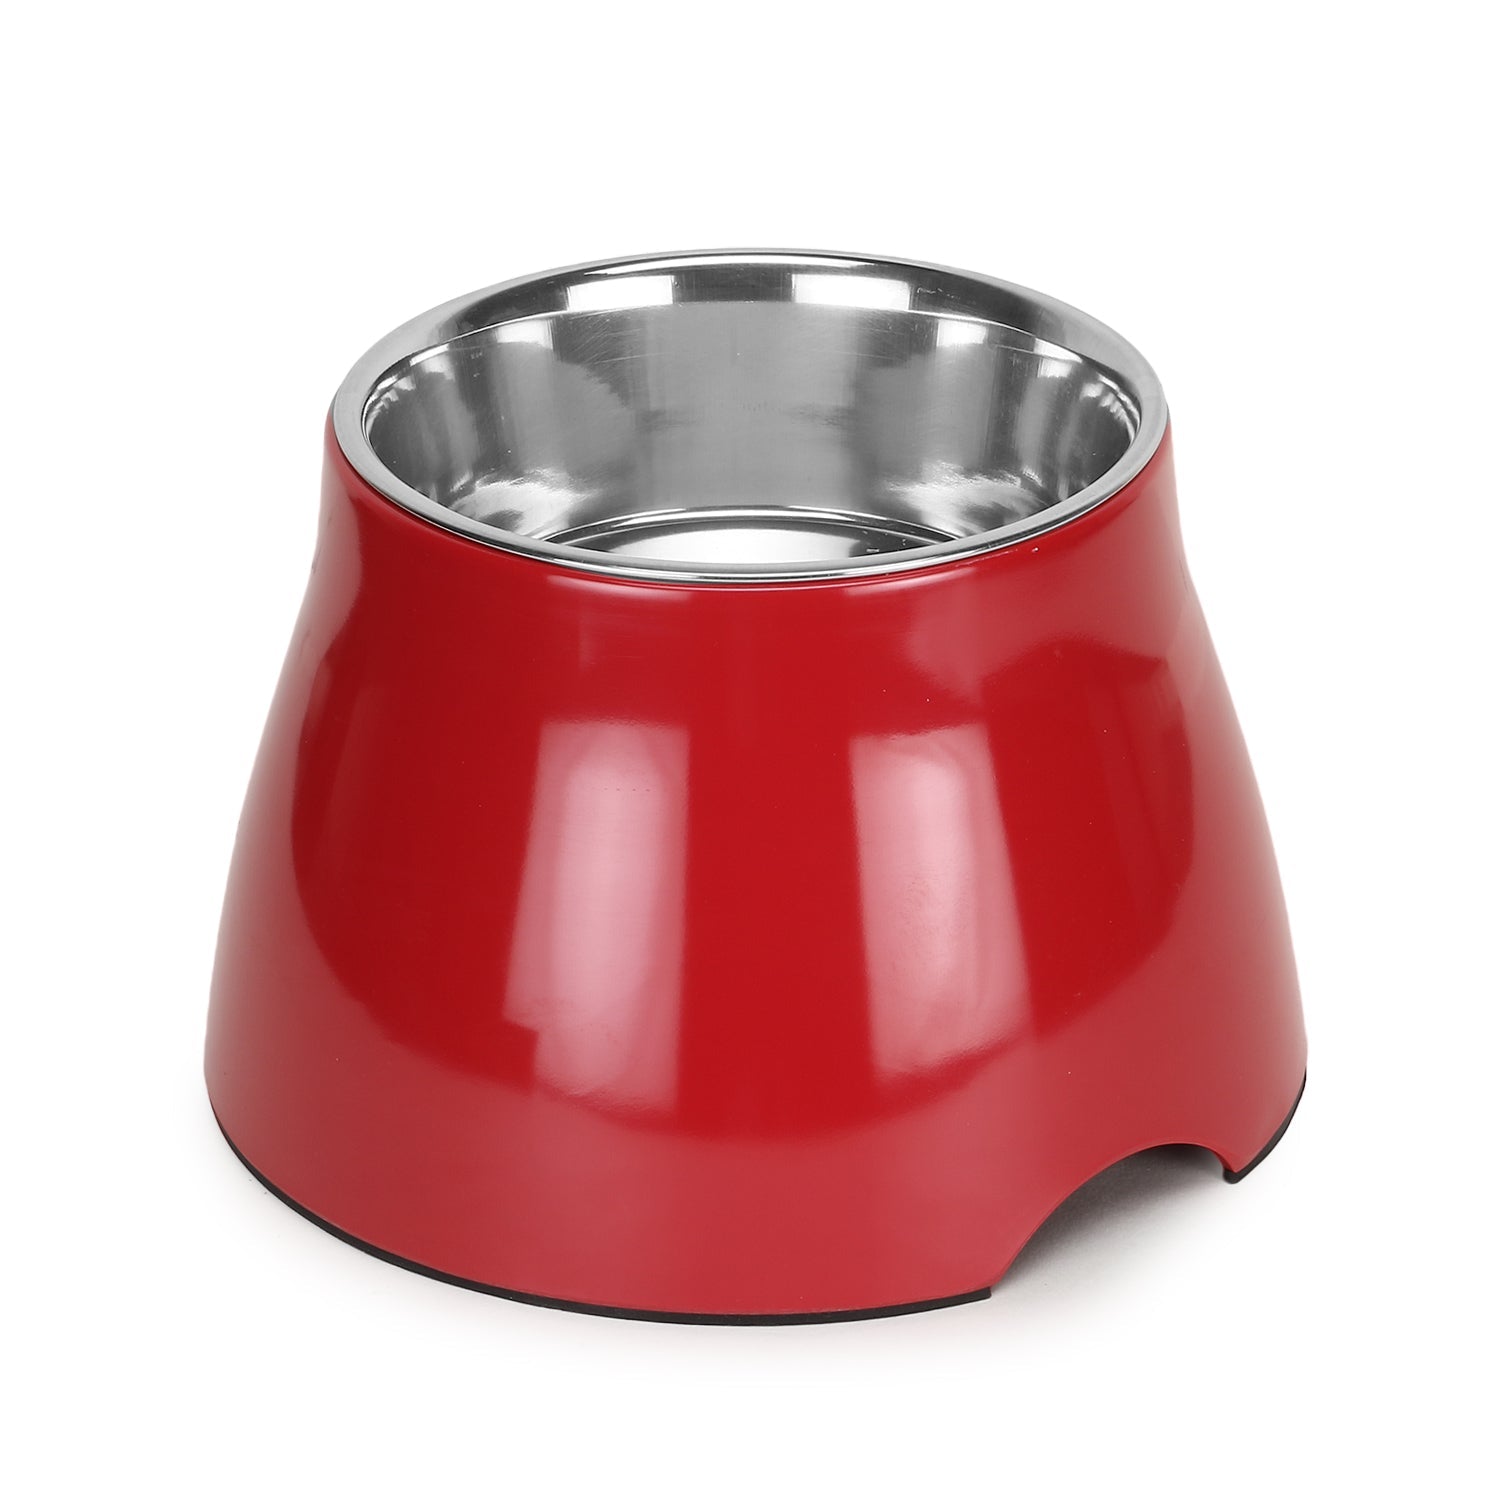 Elevated Melamine and Stainless Steel Pet Feeding Bowls for Bigger Ears Dogs, 600ml (Red)